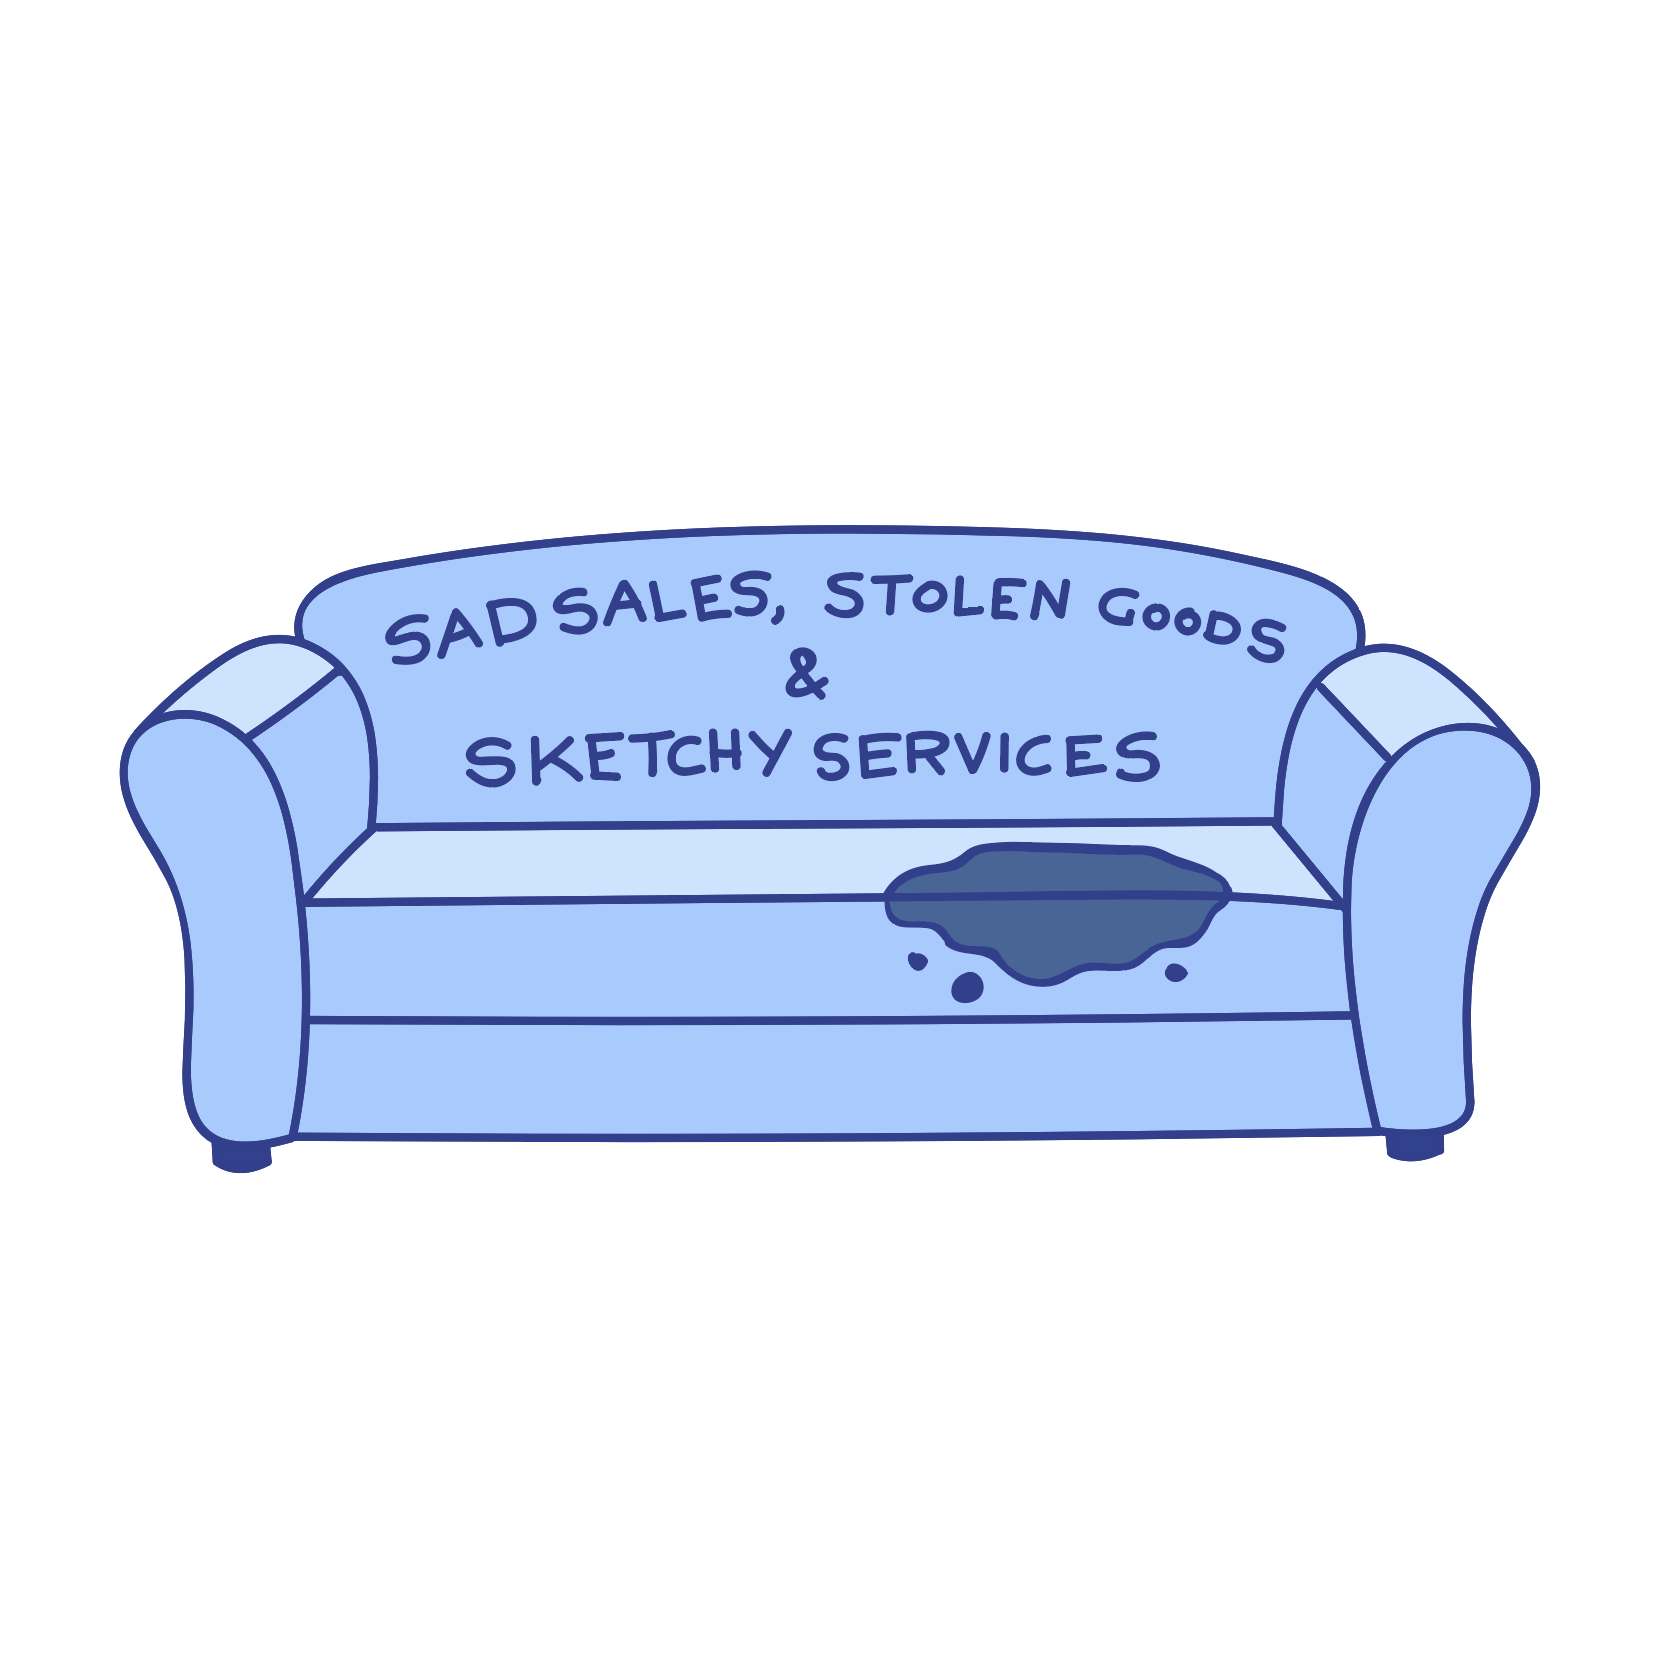 A blue sticker of a sofa with a stain. The couch reads "SAD SALES, STOLEN GOODS, & SKETCHY SERVICES".